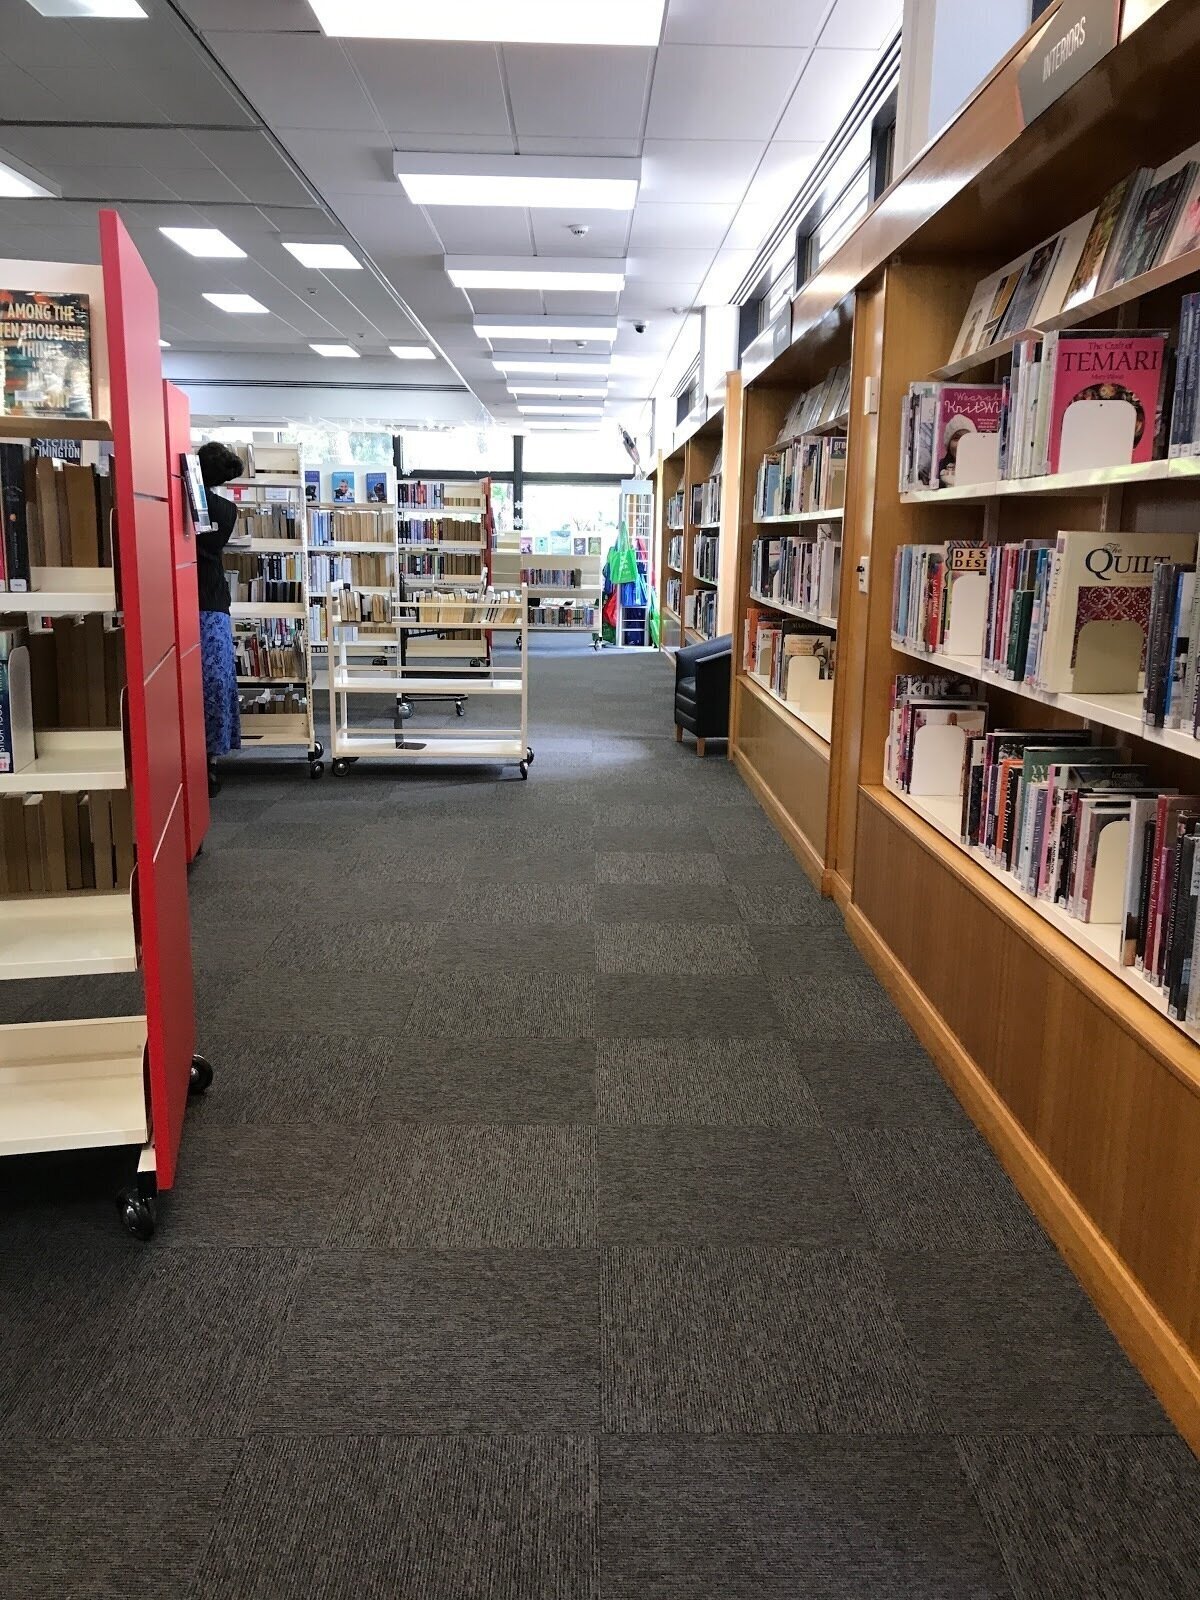 <span class="translation_missing" title="translation missing: en.meta.location_title, location_name: Glenorchy Library, city: Glenorchy">Location Title</span>